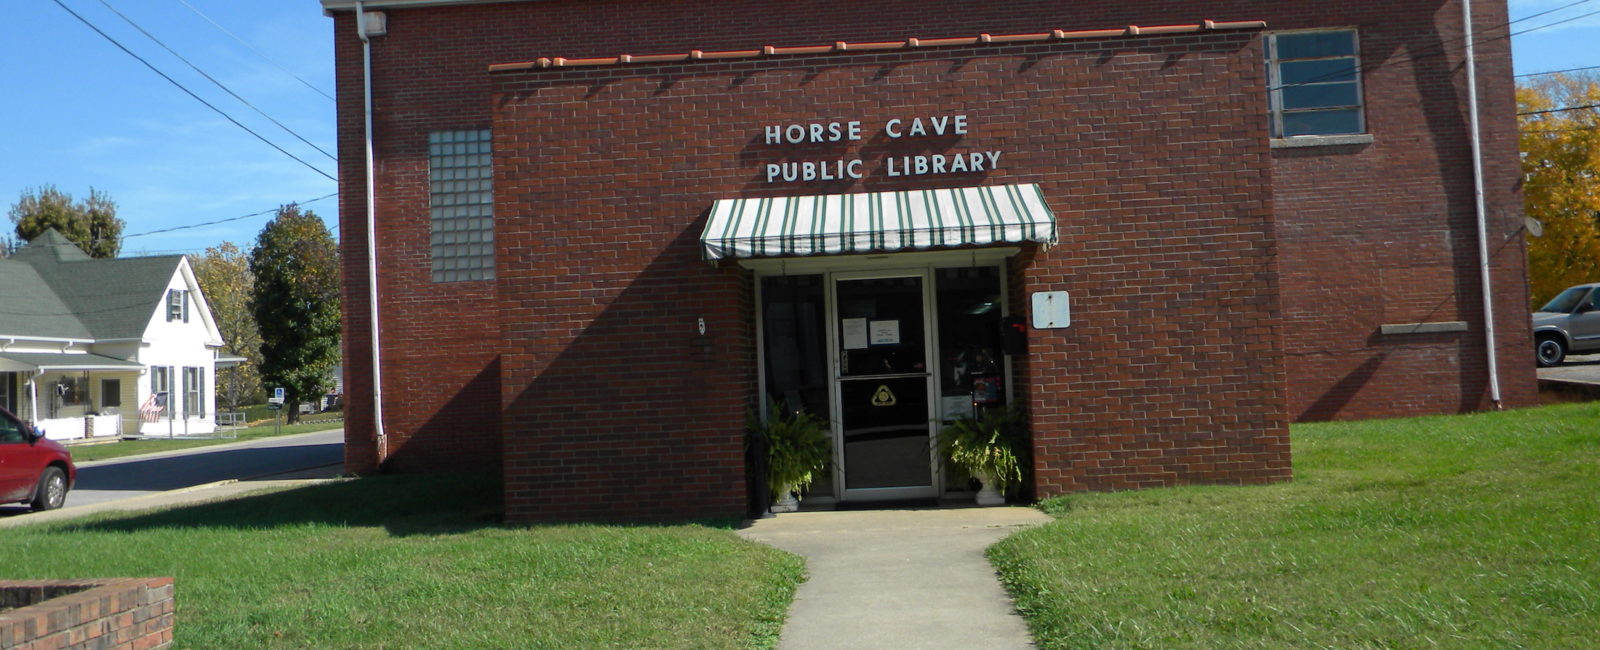 Horse Cave Public Library